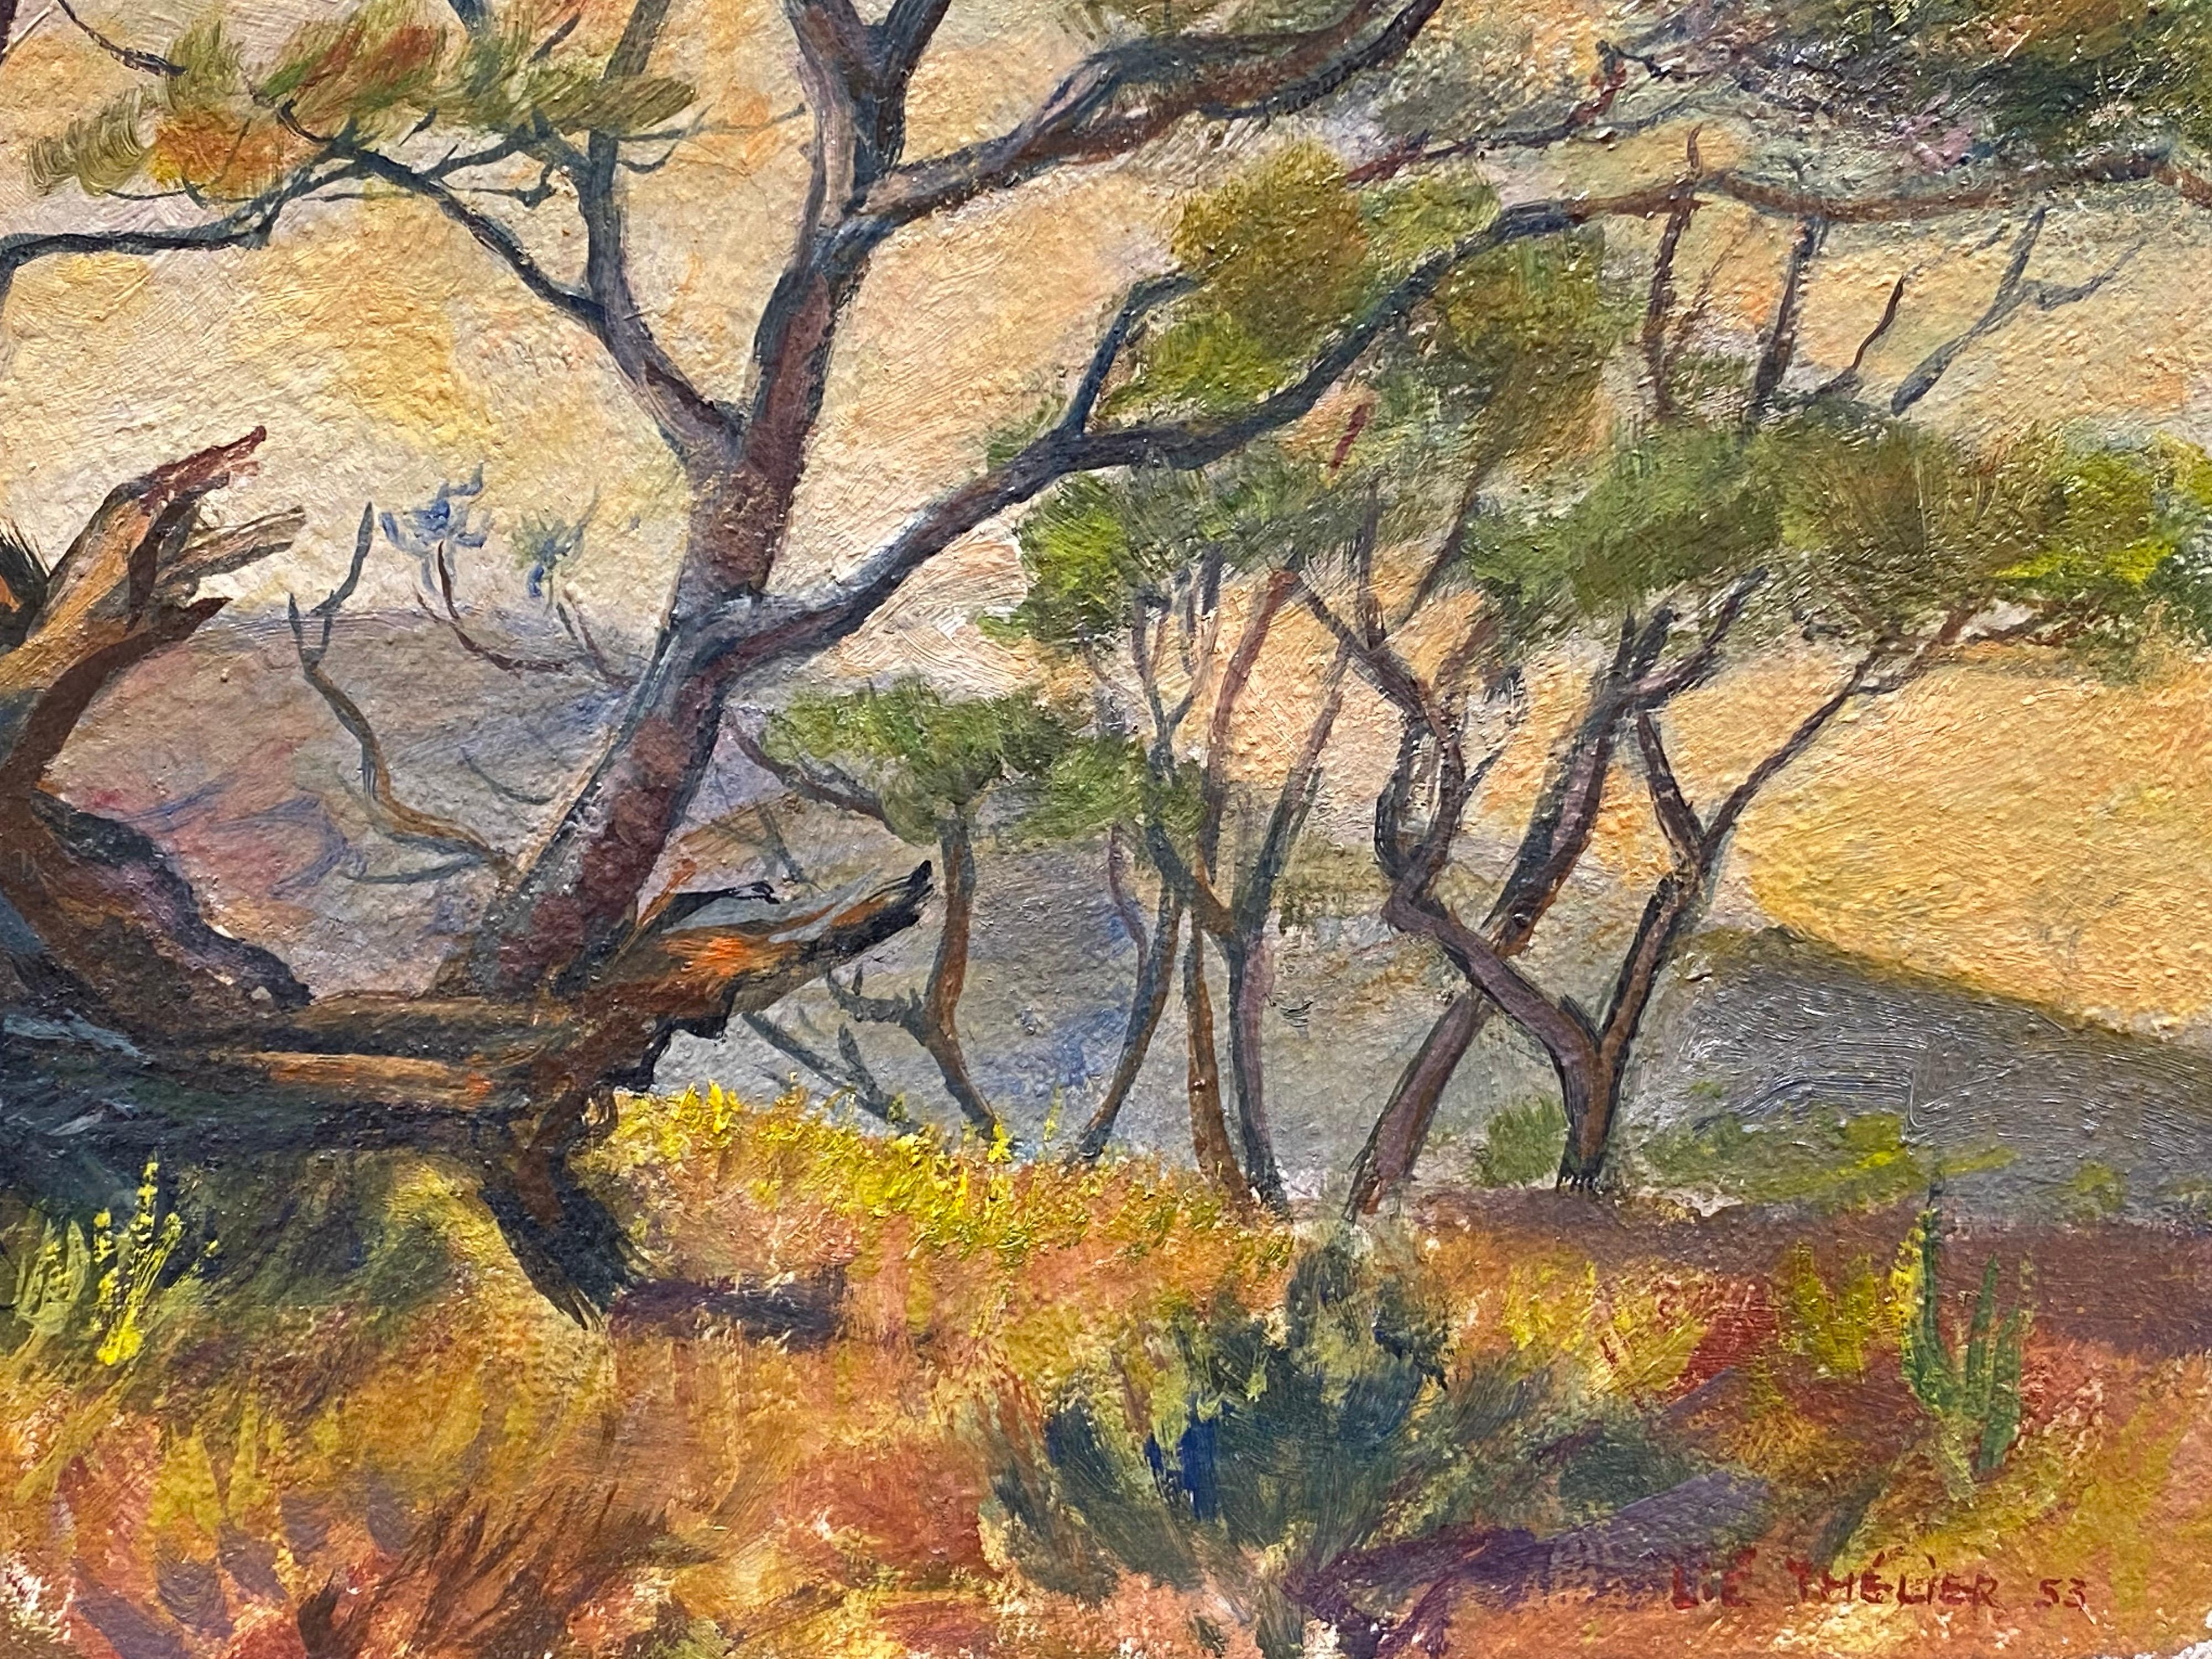 Provencal landscape
French, mid 20th century
signed and dated
oil painting on canvas, unframed
measures: 10.5 x 14.5 inches
inscribed verso
condition report: very good
provenance: private collection, France